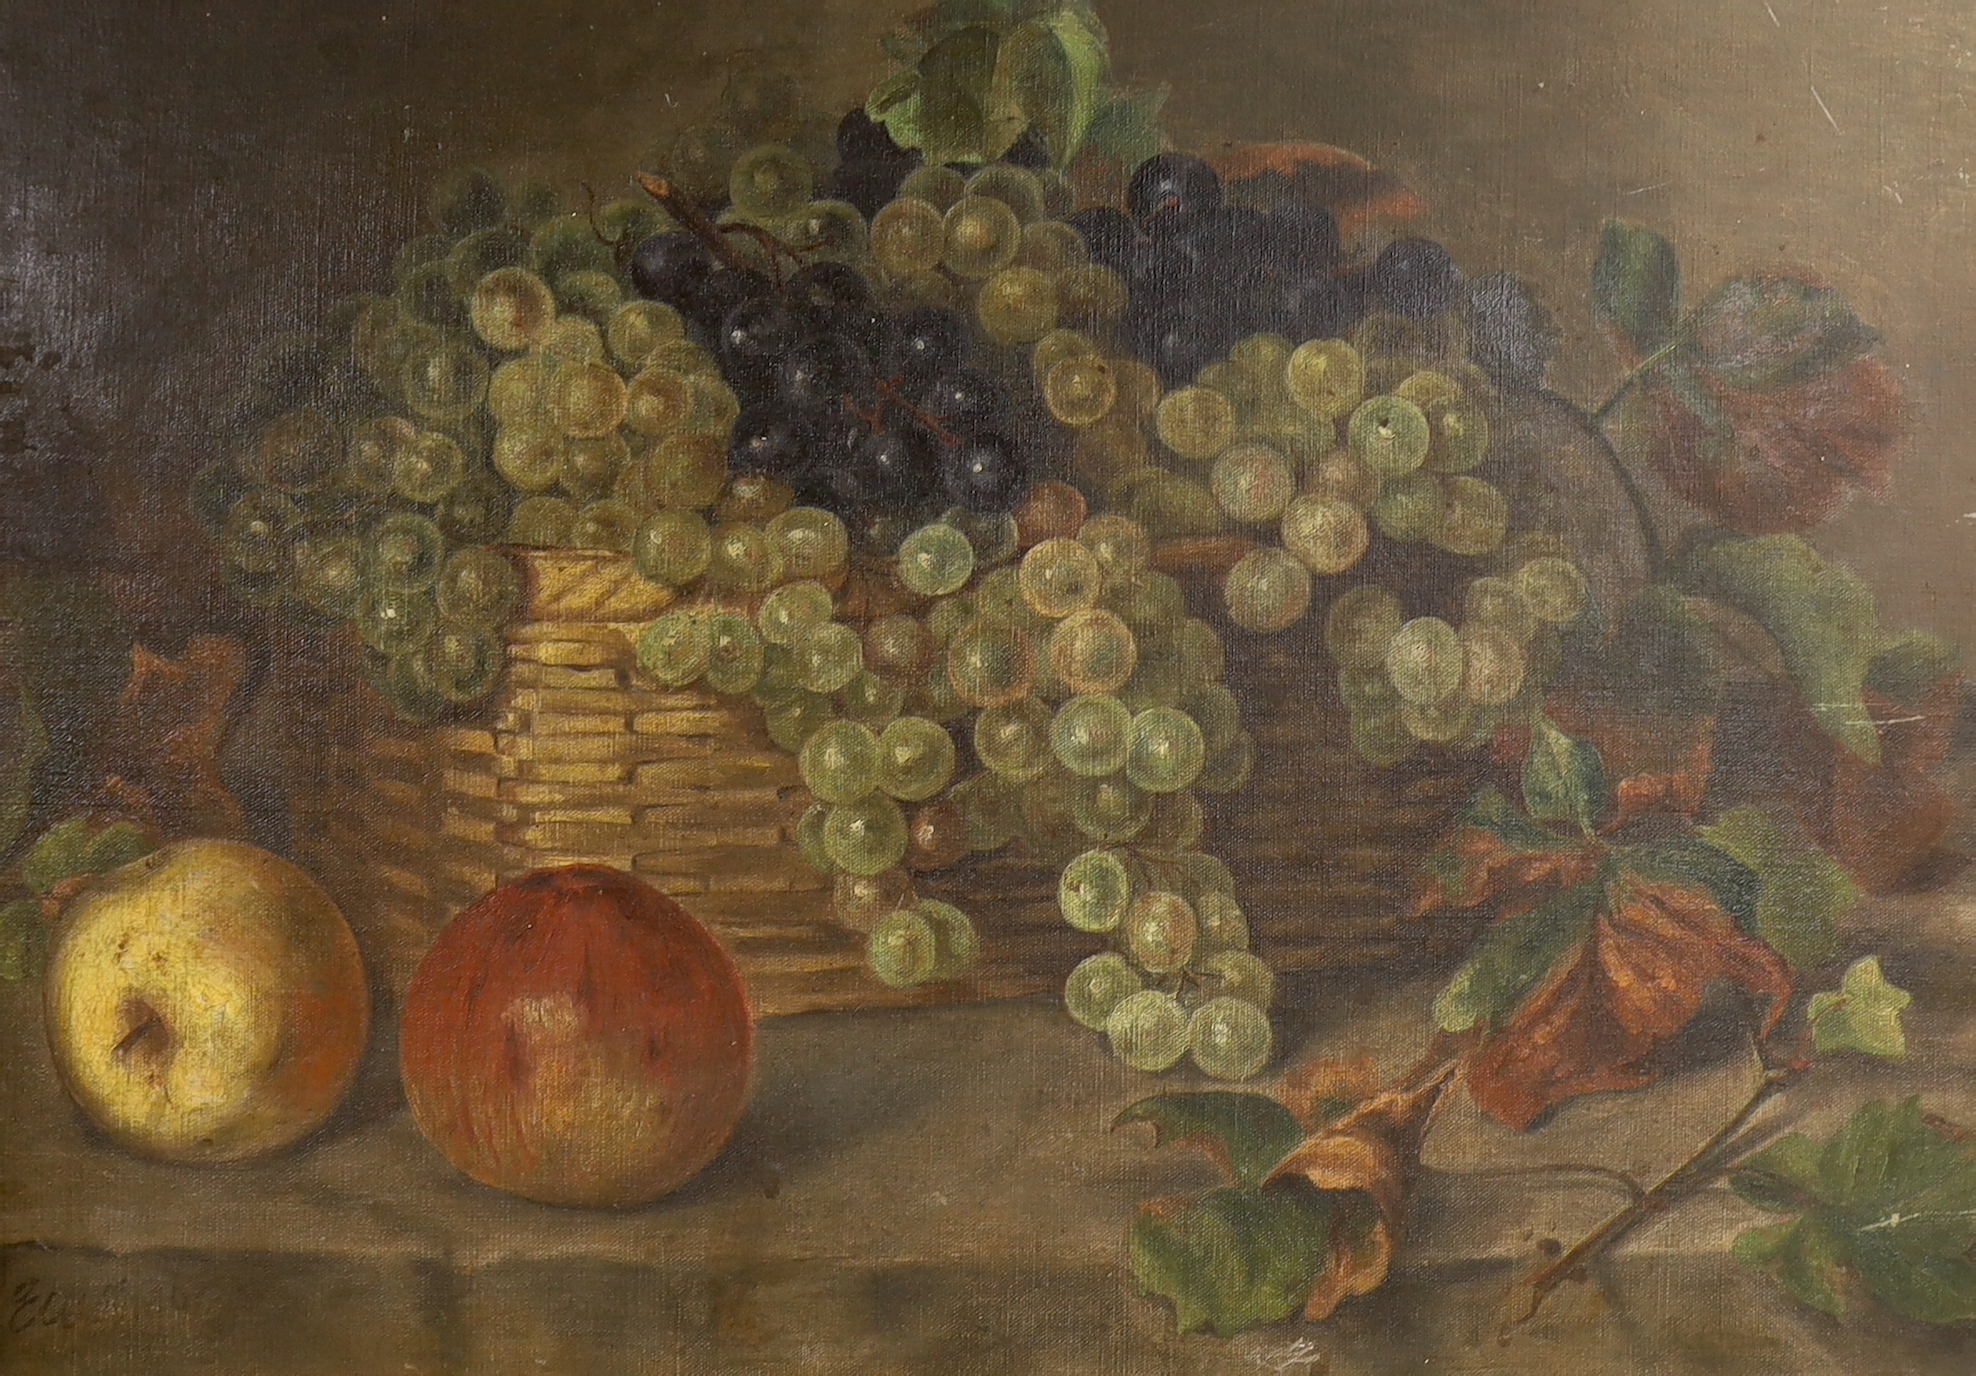 Late 19th / early 20th century, English School, oil on canvas, Still life of fruit, indistinctly signed lower left, 35 x 51cm, unframed